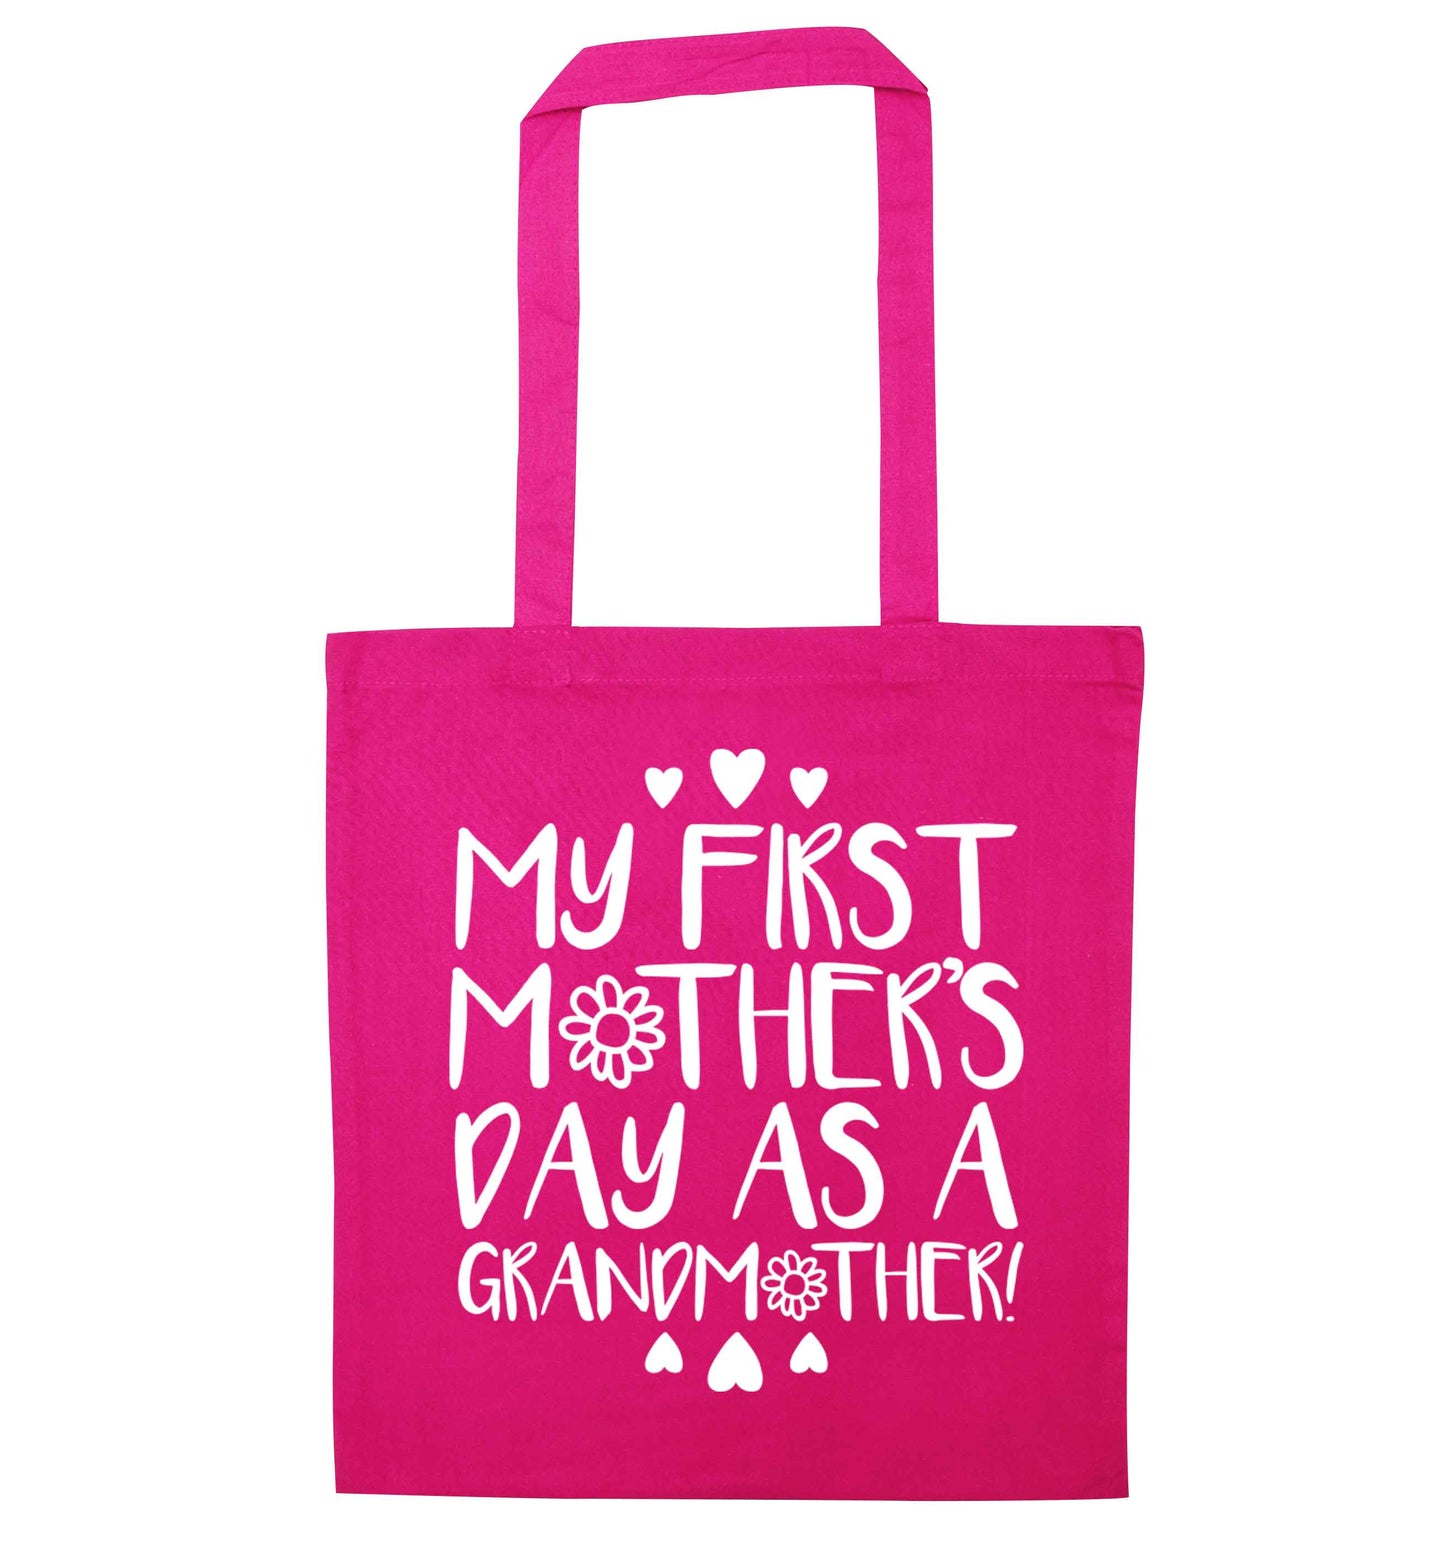 It's my first mother's day as a grandmother pink tote bag